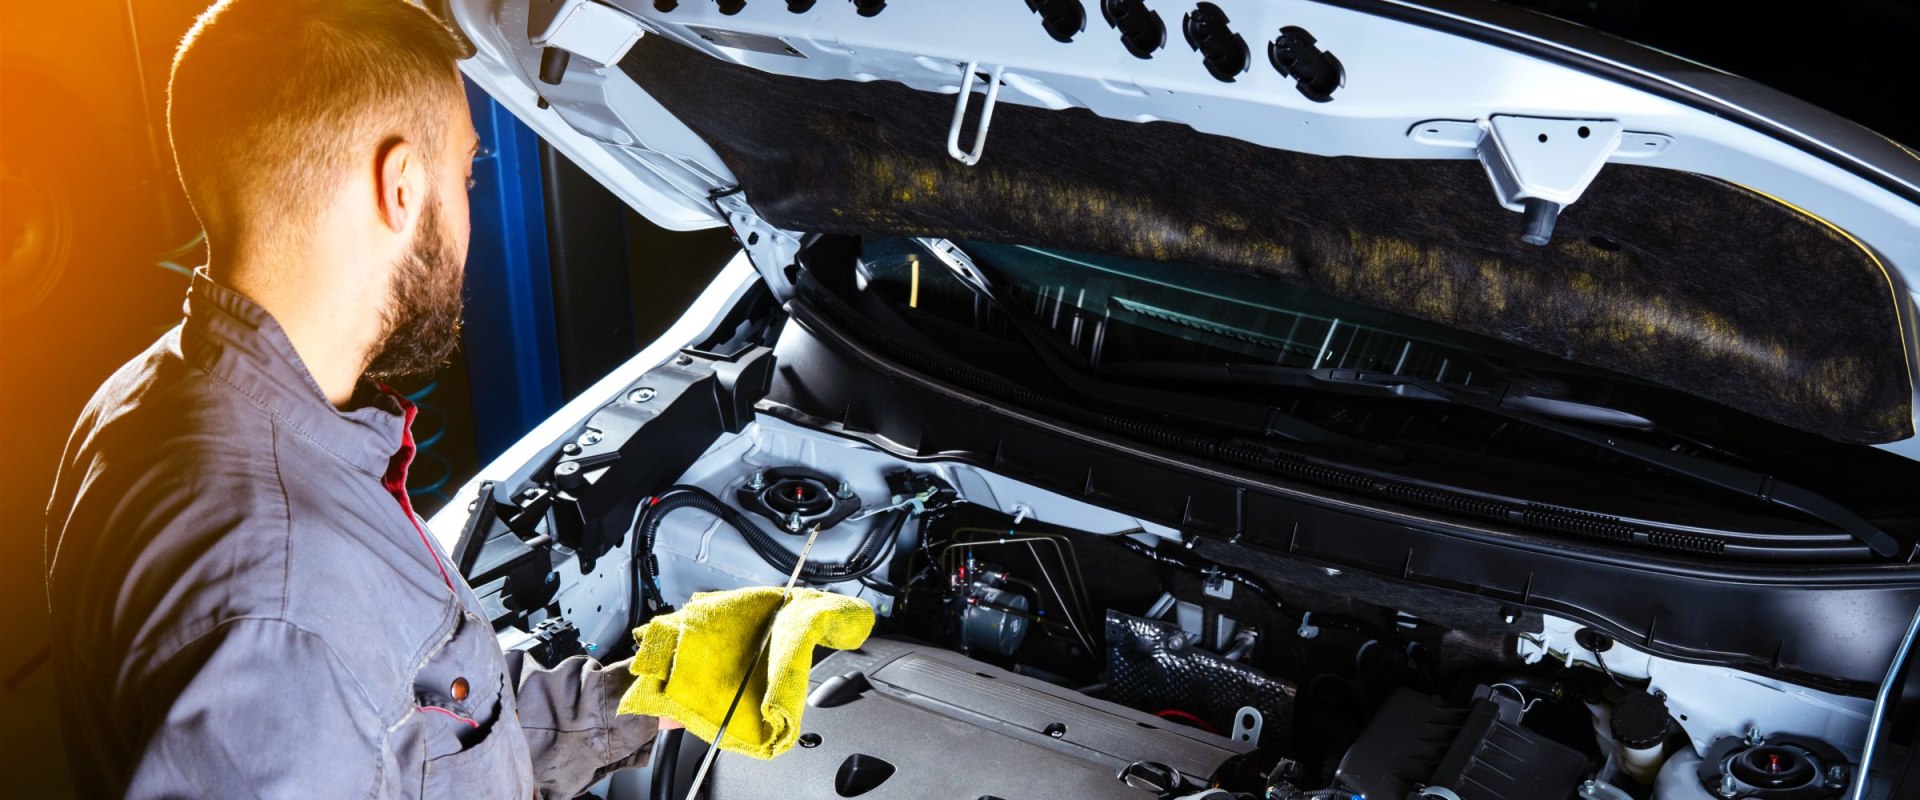 Staying Ahead of Common Car Repair Issues